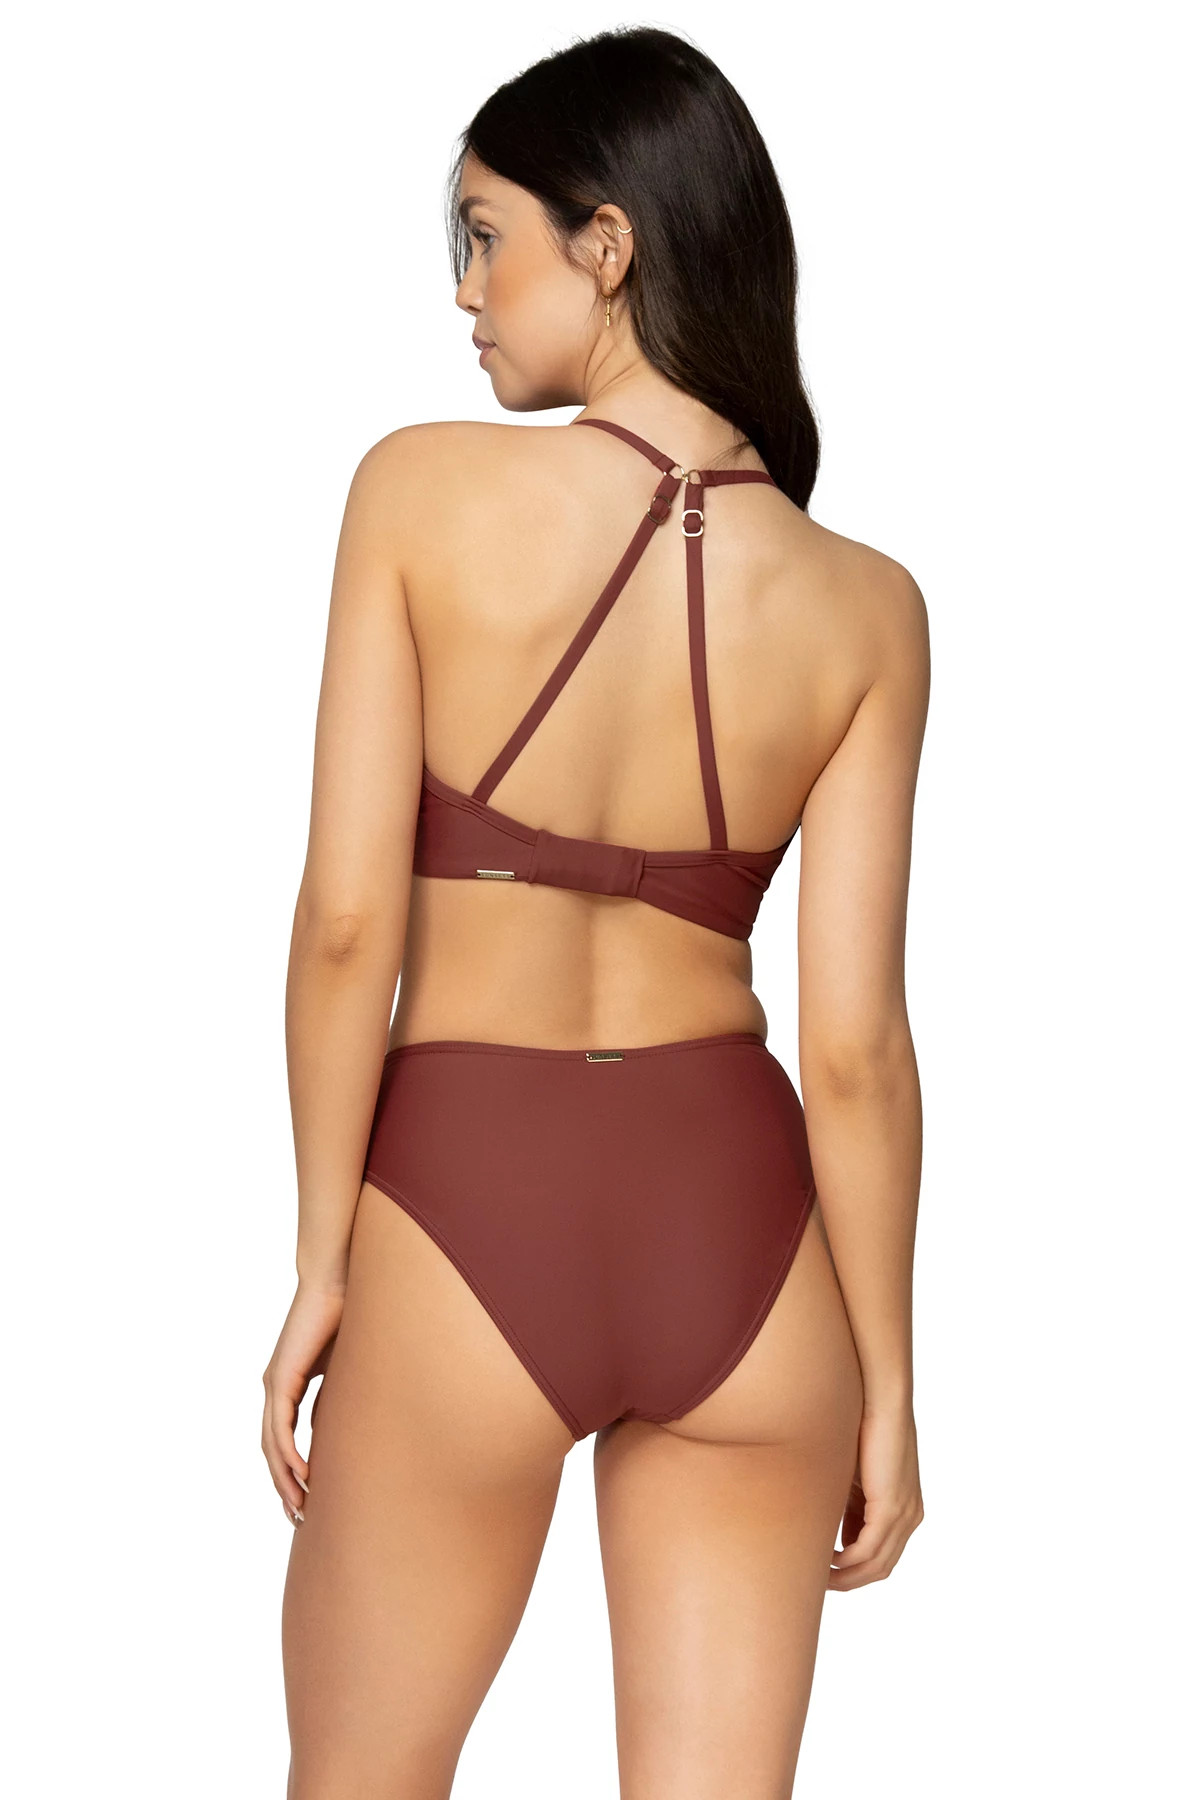 TUSCAN RED Crossroads Underwire Bikini Top (D+ Cup) image number 2